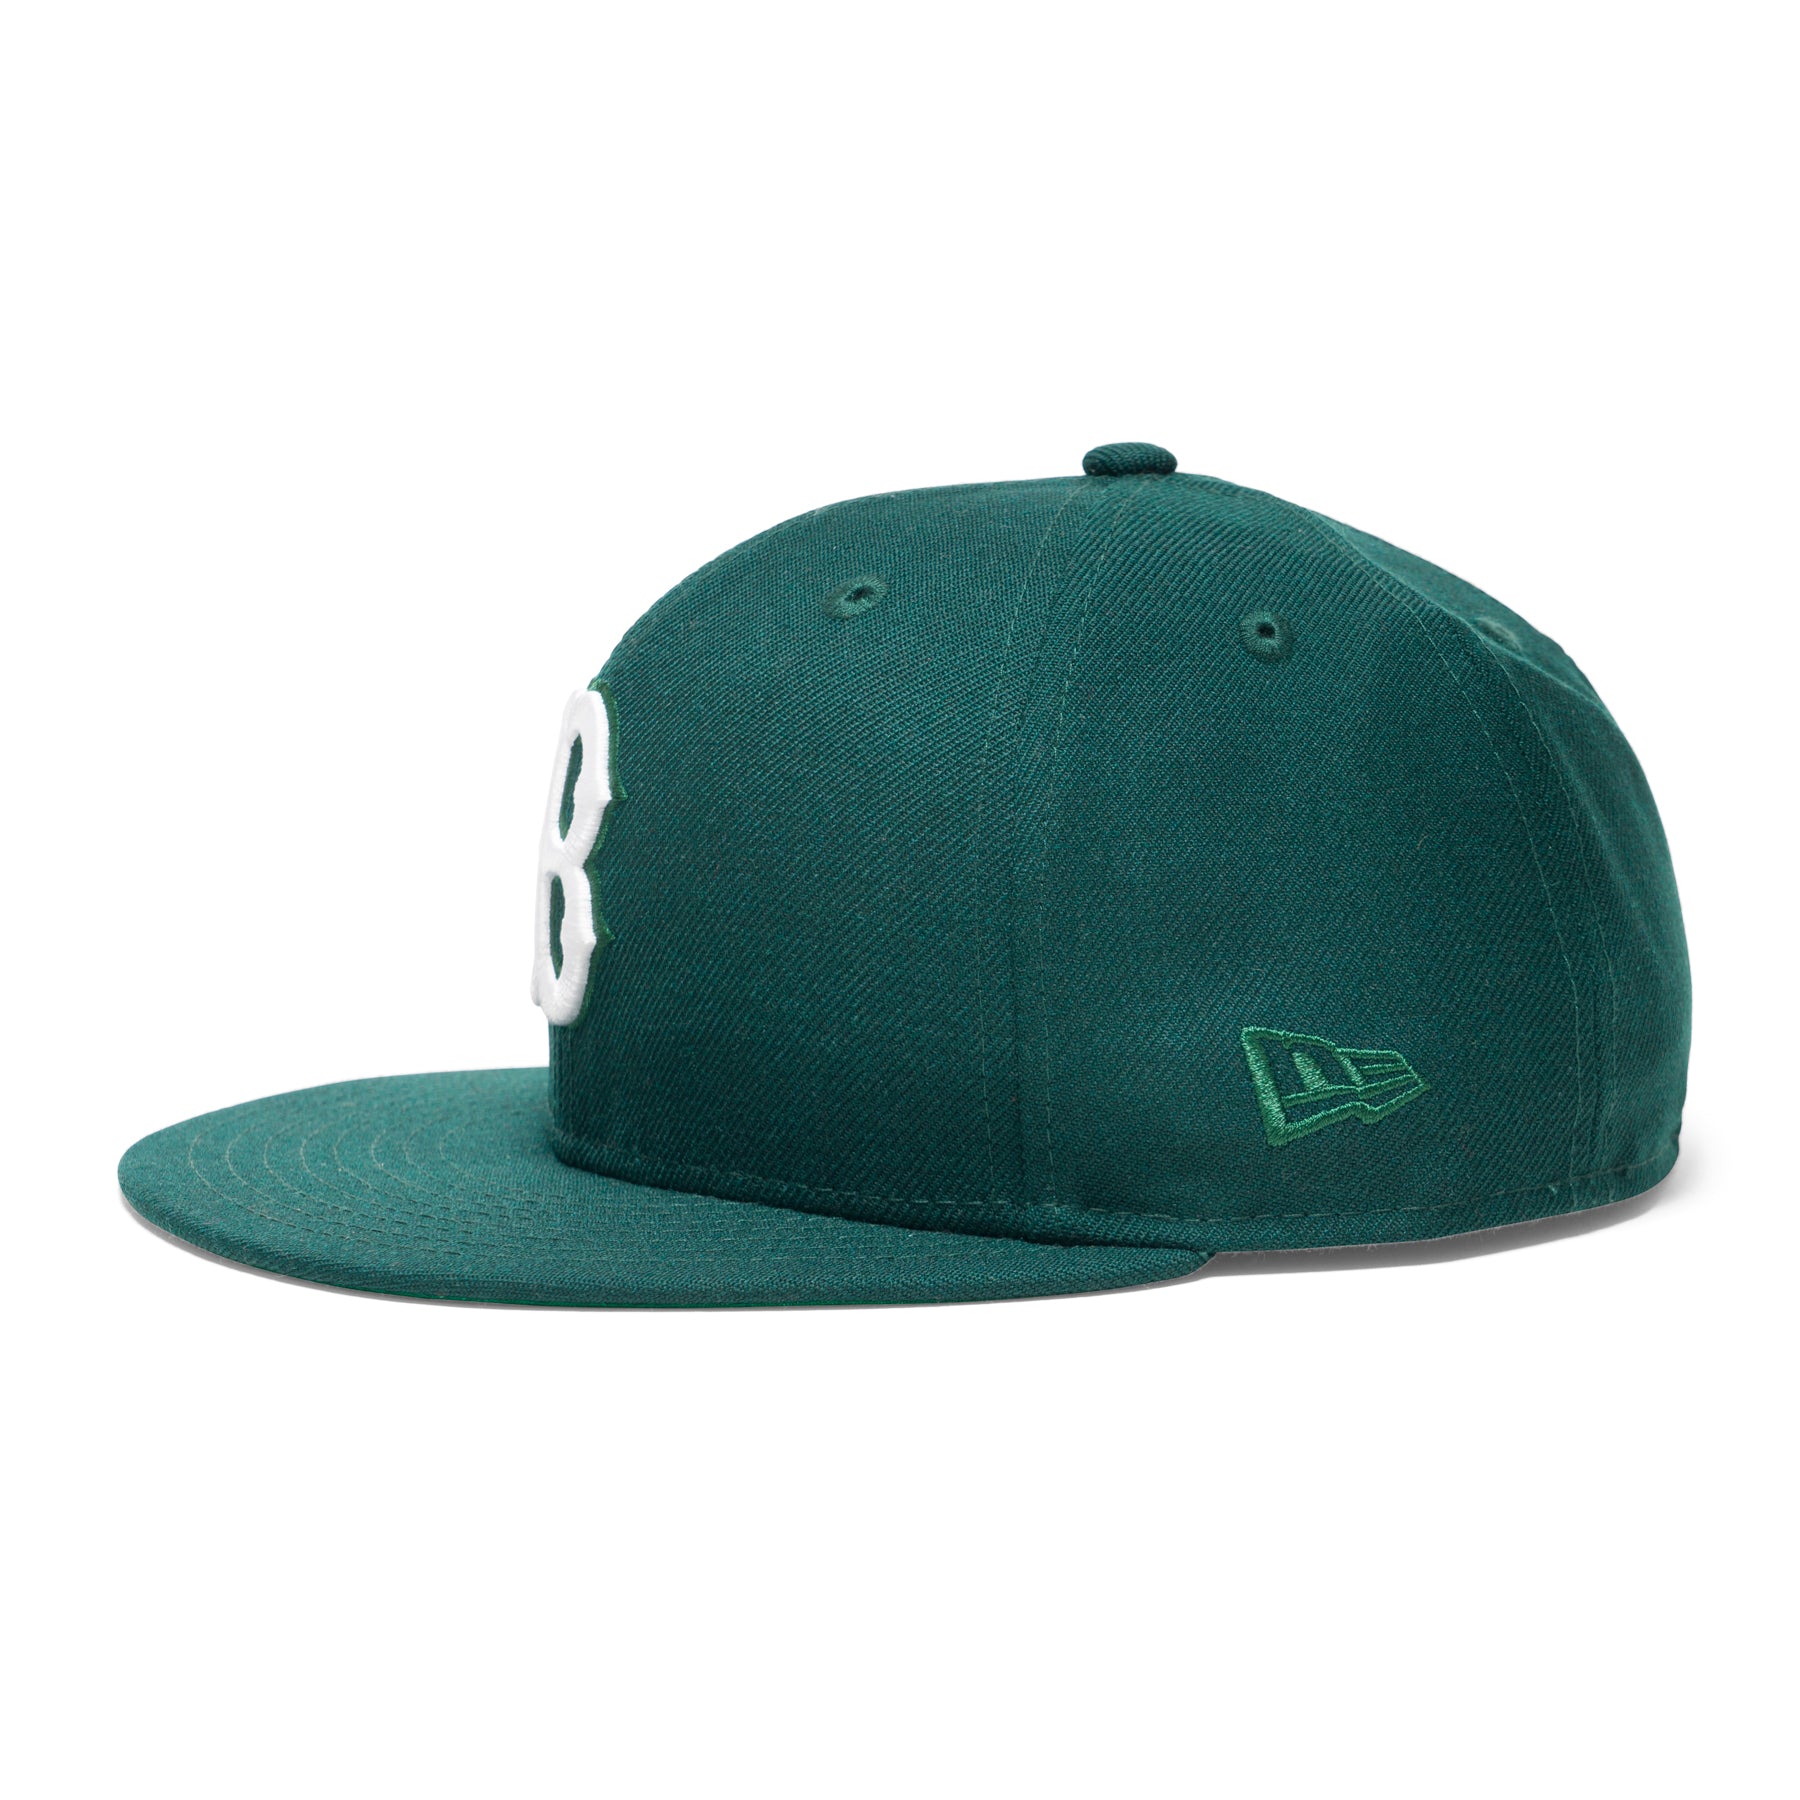 Concepts x New Era 59FIFTY Boston Red Sox Fitted Hat (Camel/Lime Green) 7